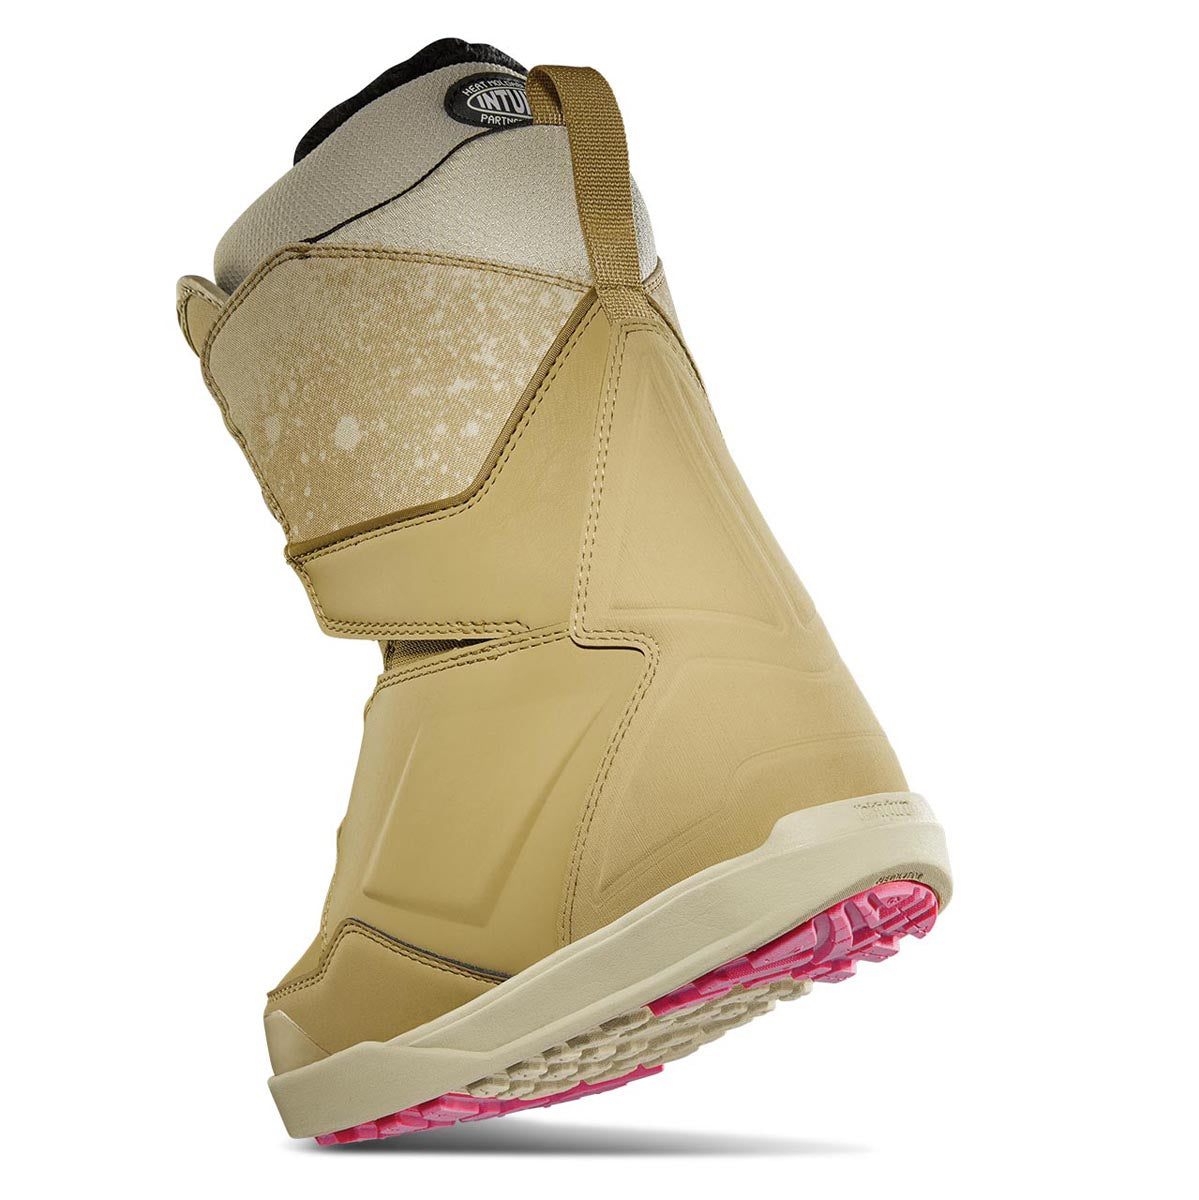 Thirty Two Womens Lashed Double Boa B4bc 2024 Snowboard Boots - Tan image 2